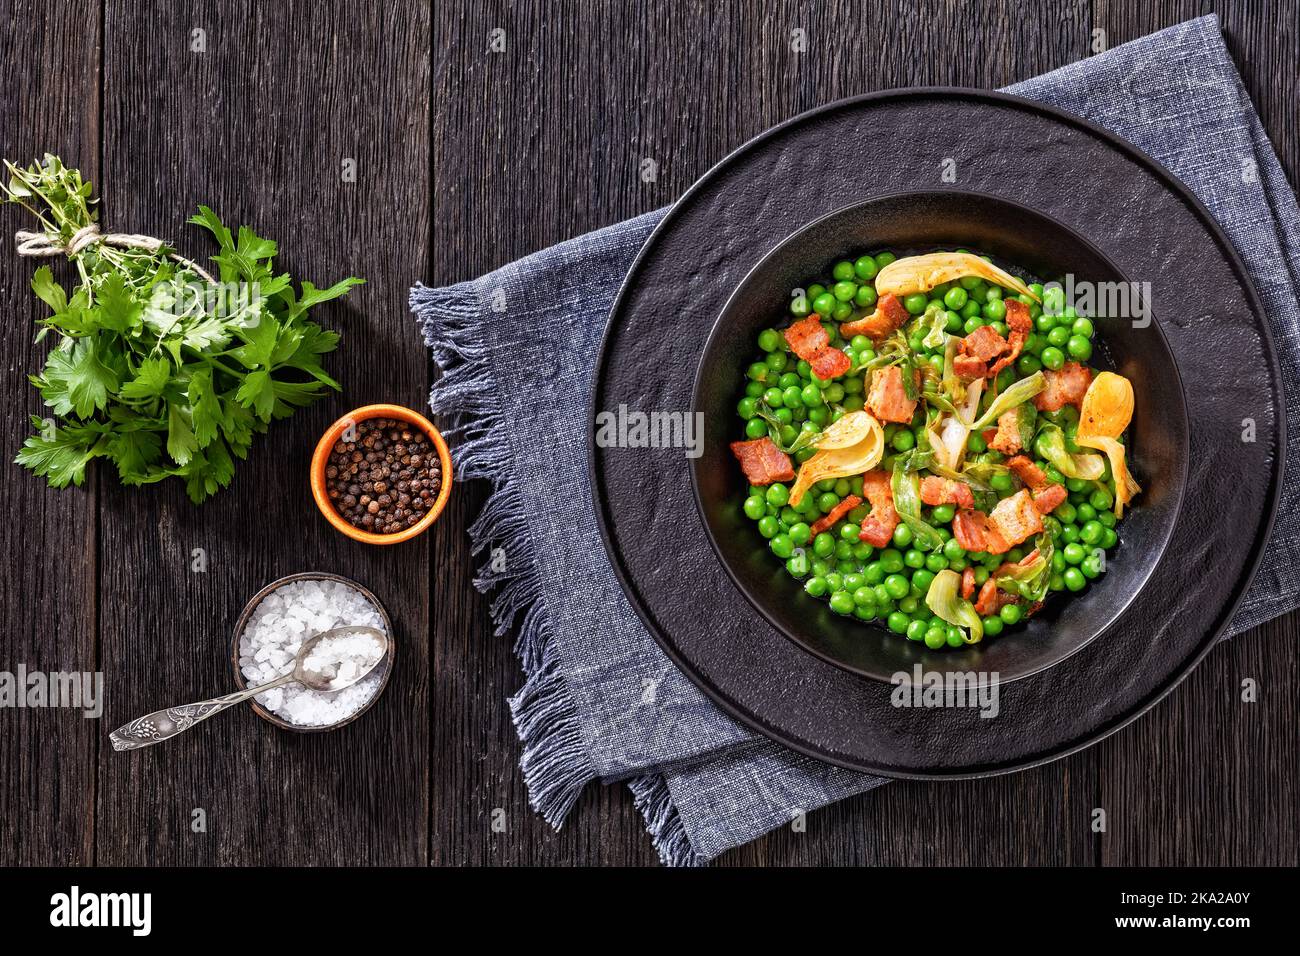 petits pois, french dish of tender, new-season peas braised in chicken stock with lettuce, onion bulbs and speck, cut into lardons, served in black bo Stock Photo